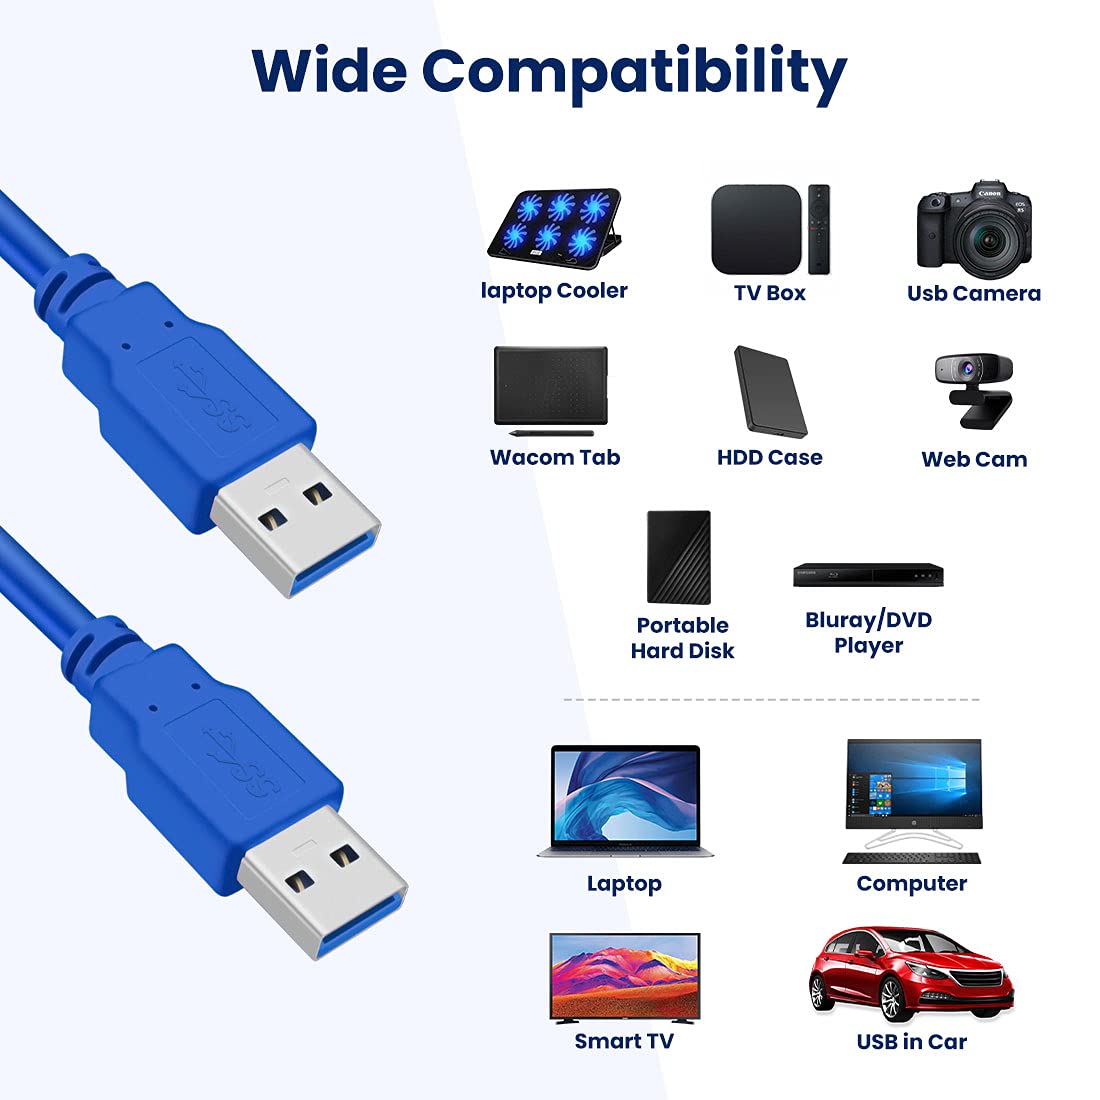 USB 3.0 Type A Male to Male 5Gbps Data Transfer Cable 1.5m